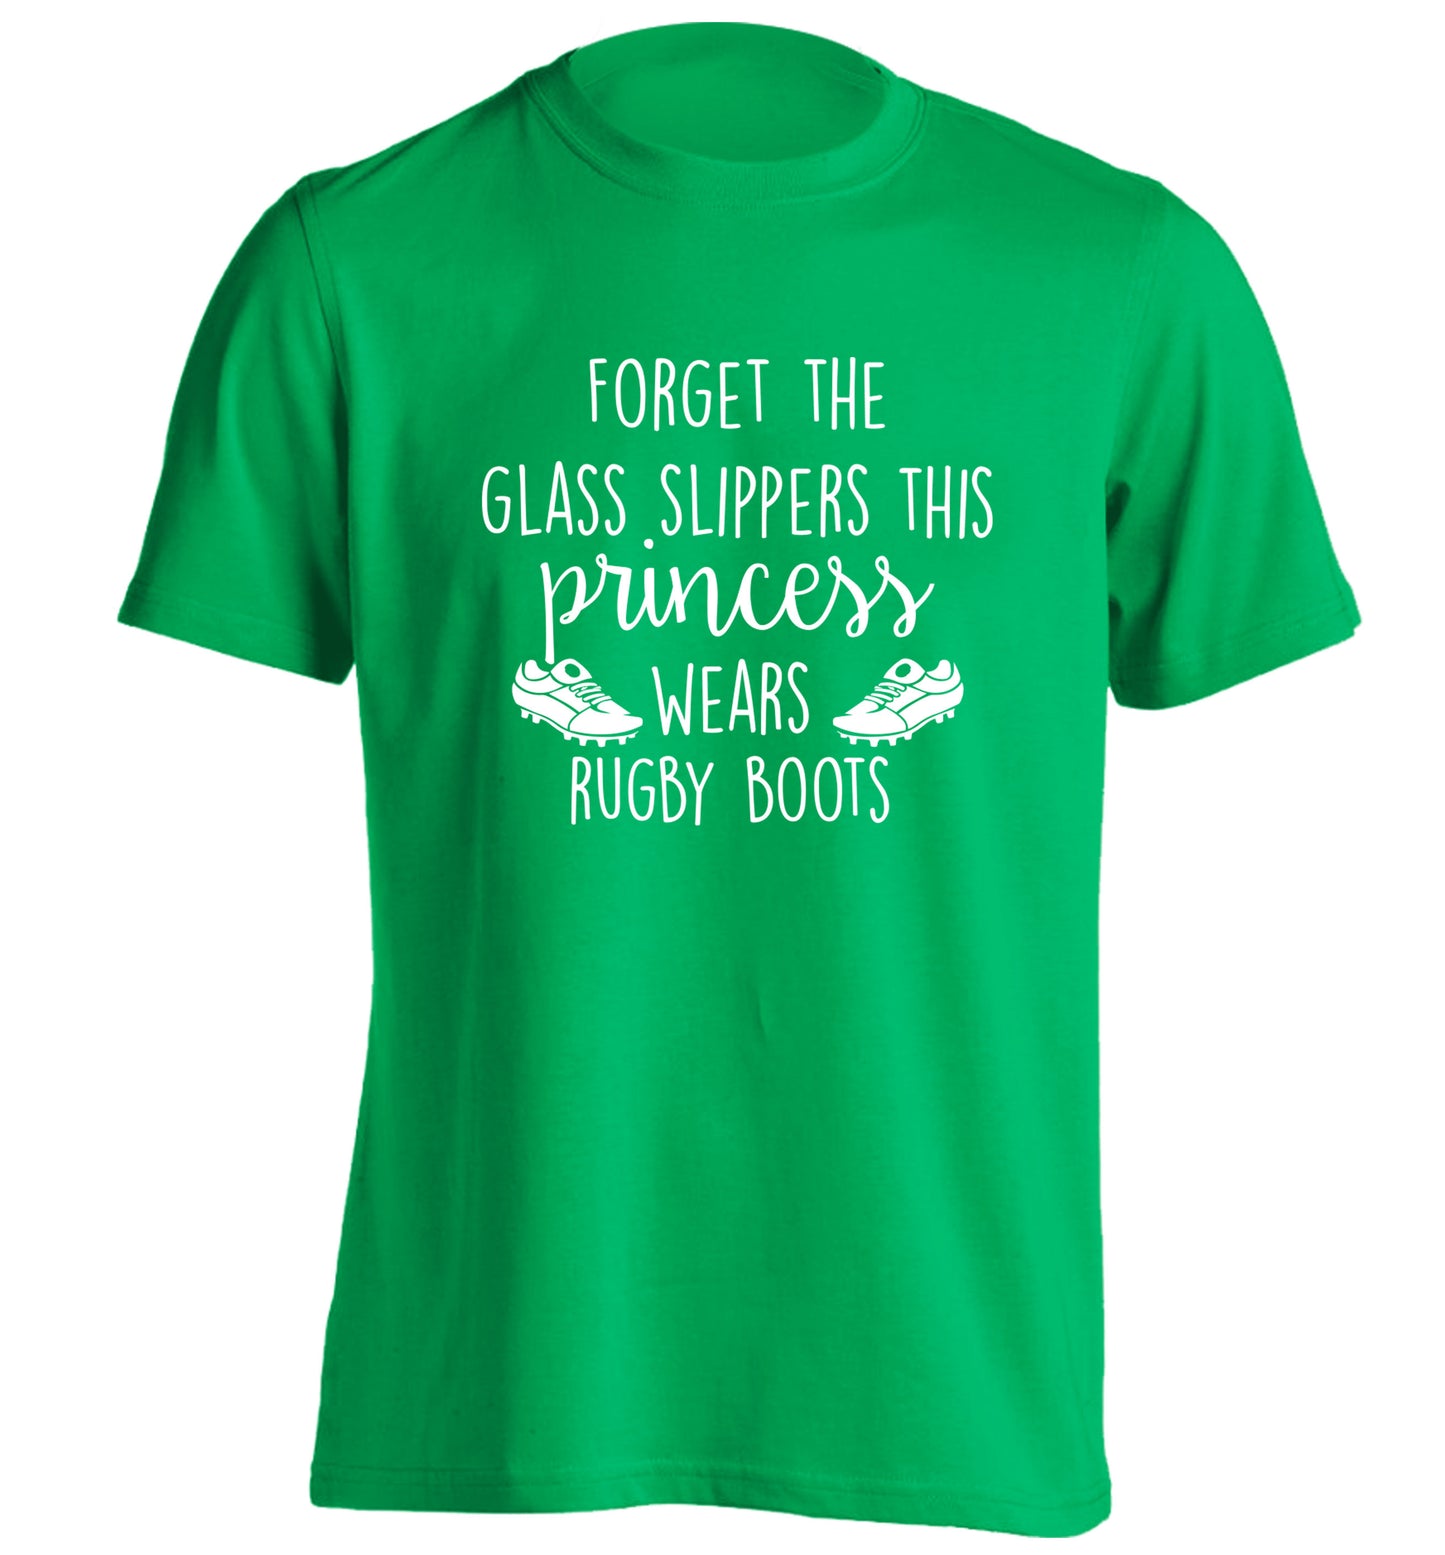 Forget the glass slippers this princess wears rugby boots adults unisex green Tshirt 2XL